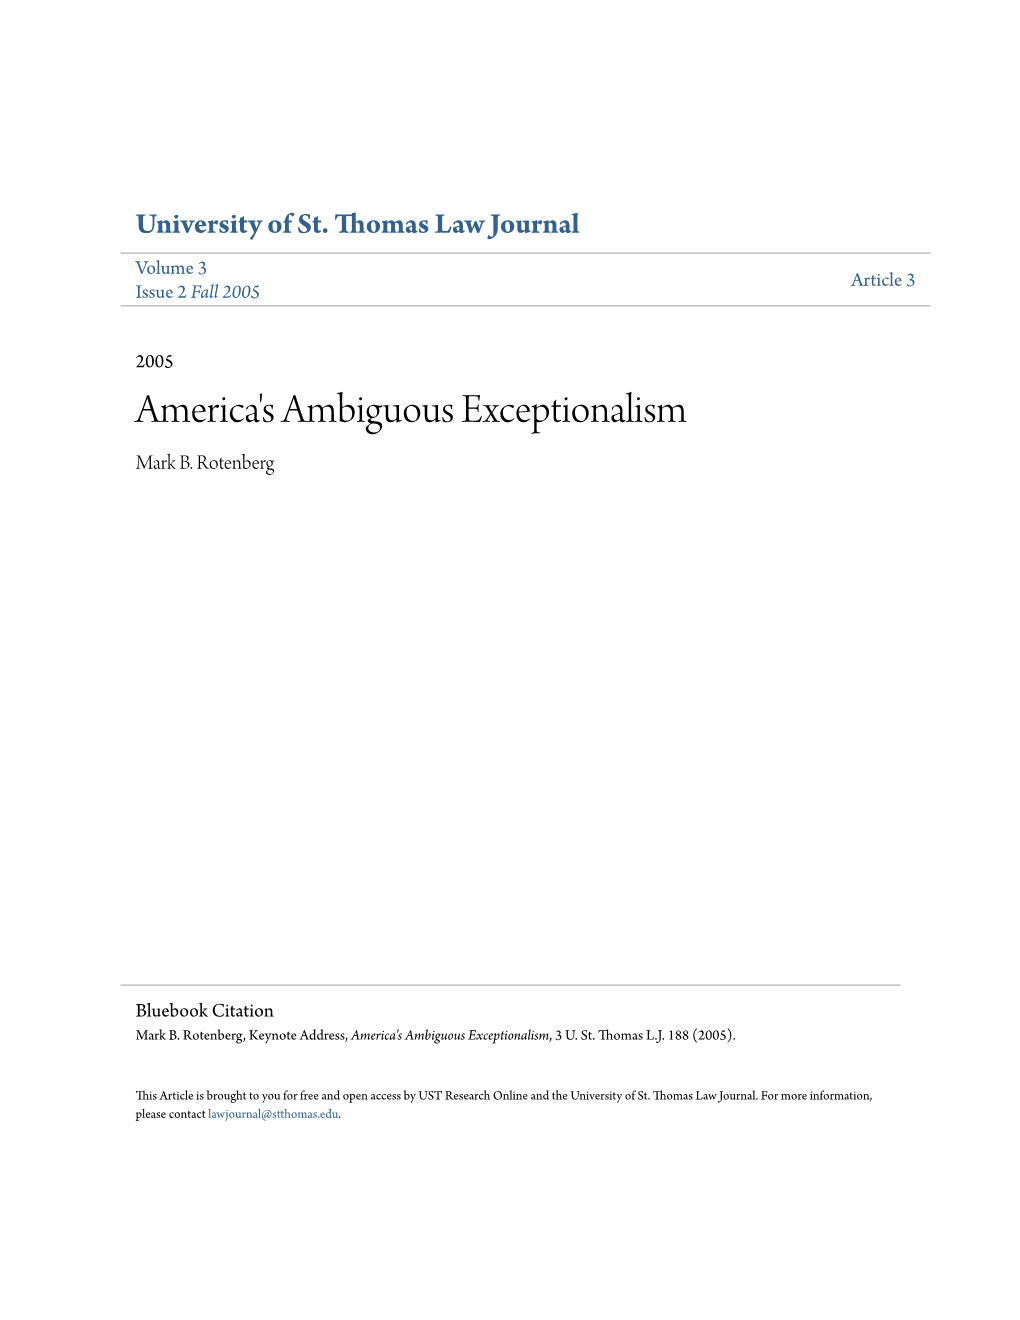 America's Ambiguous Exceptionalism Mark B